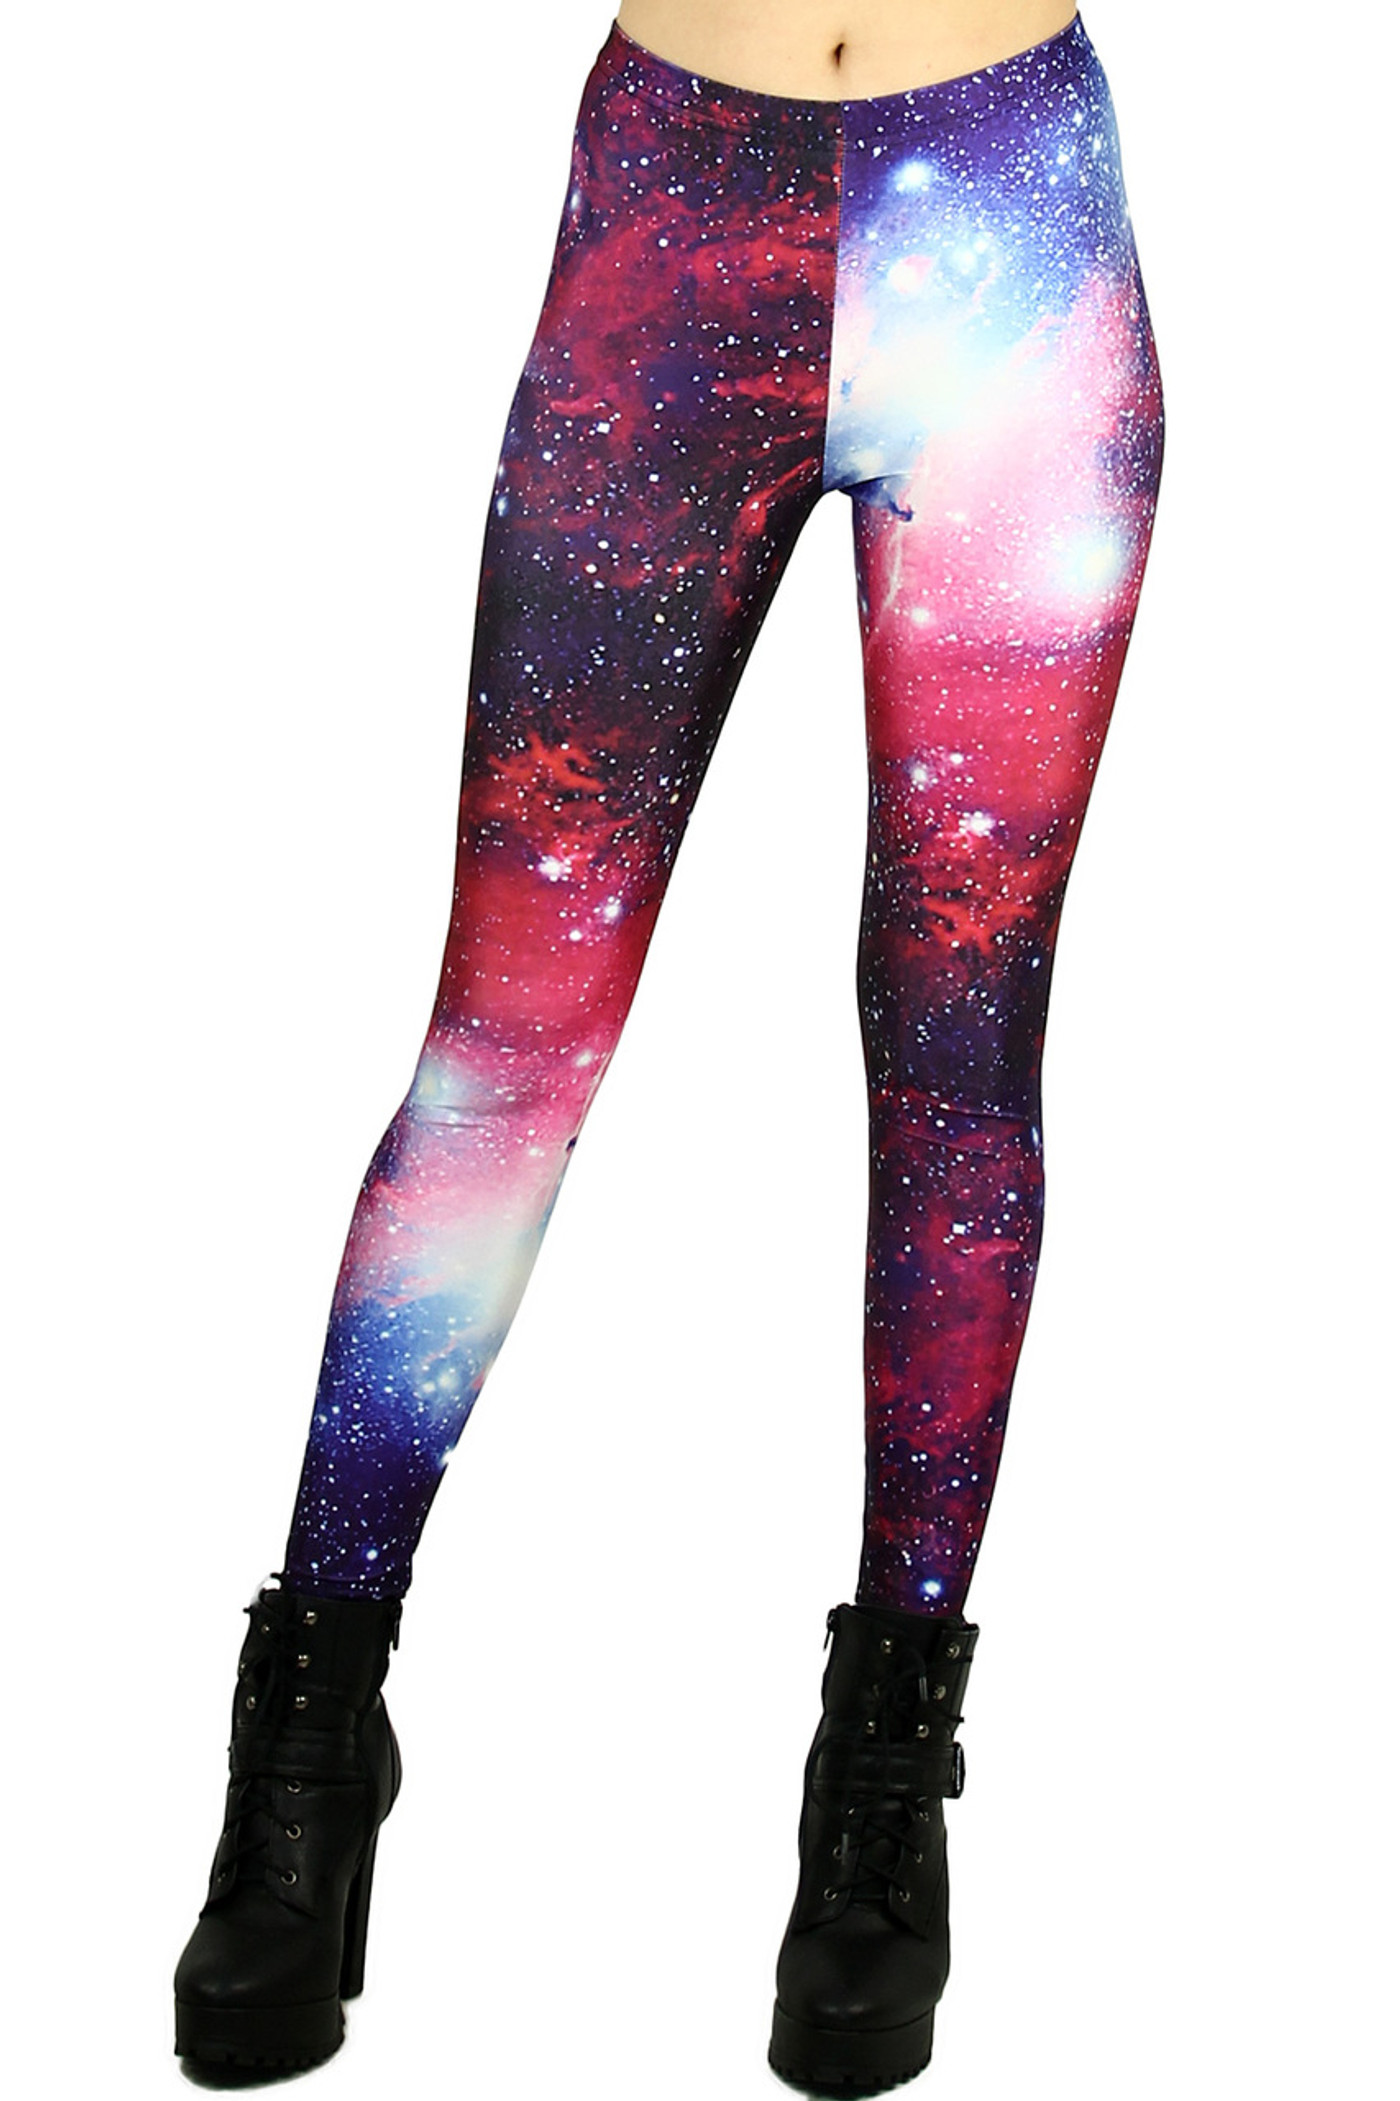 https://cdn11.bigcommerce.com/s-48euo/images/stencil/1400x2625/products/7760/65159/Epic-Galaxy-Leggings__69988.1484861396.jpg?c=2